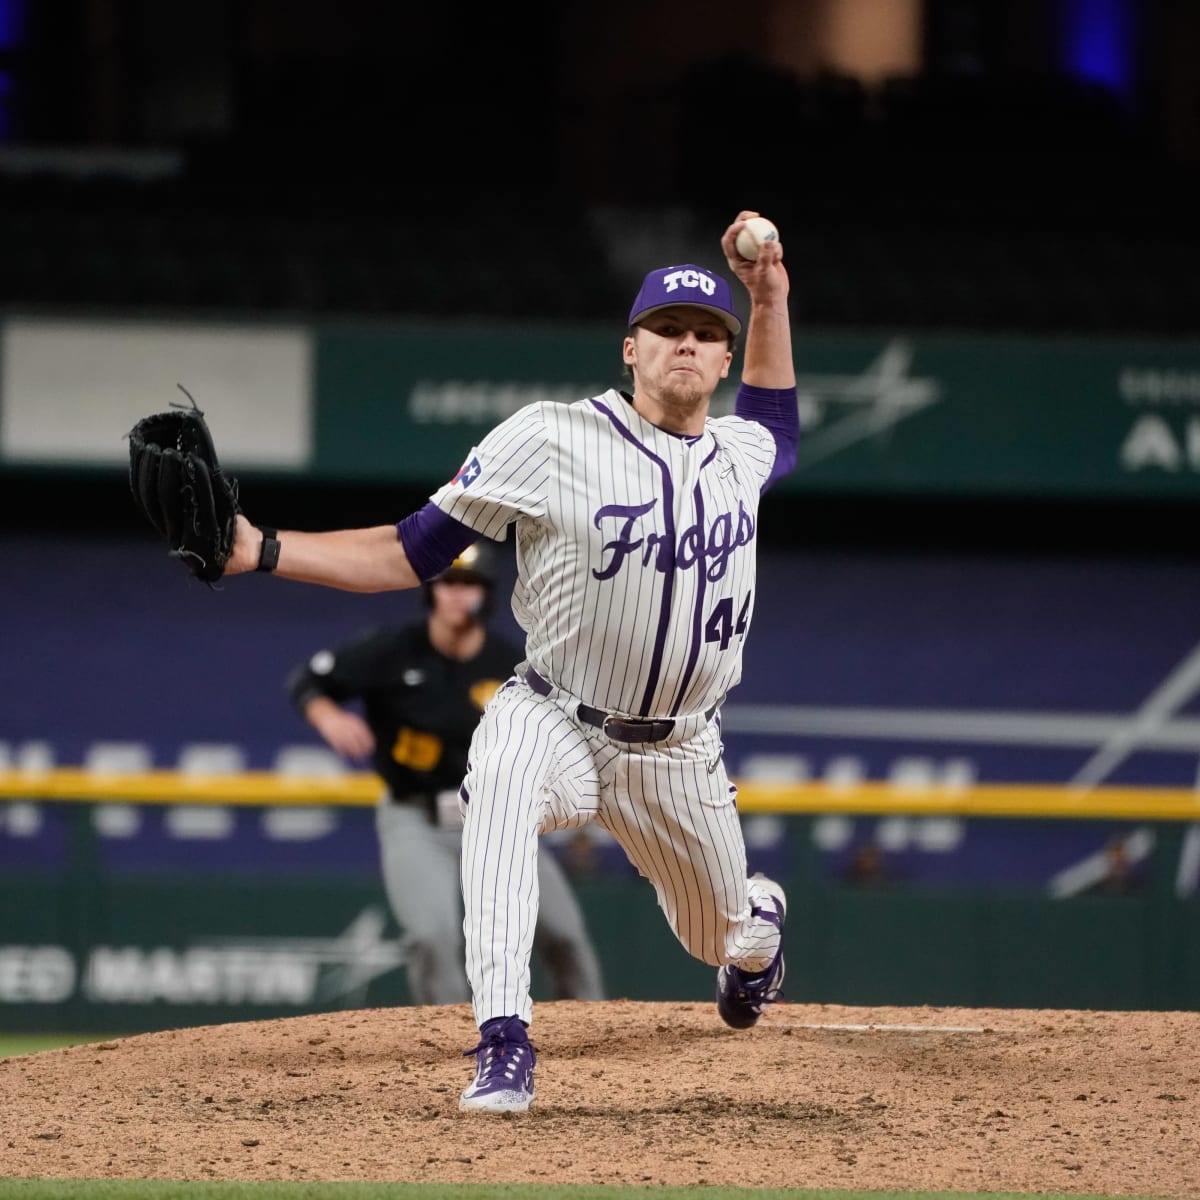 Watch Arkansas vs TCU Stream college baseball live, TV channel - How to Watch and Stream Major League and College Sports